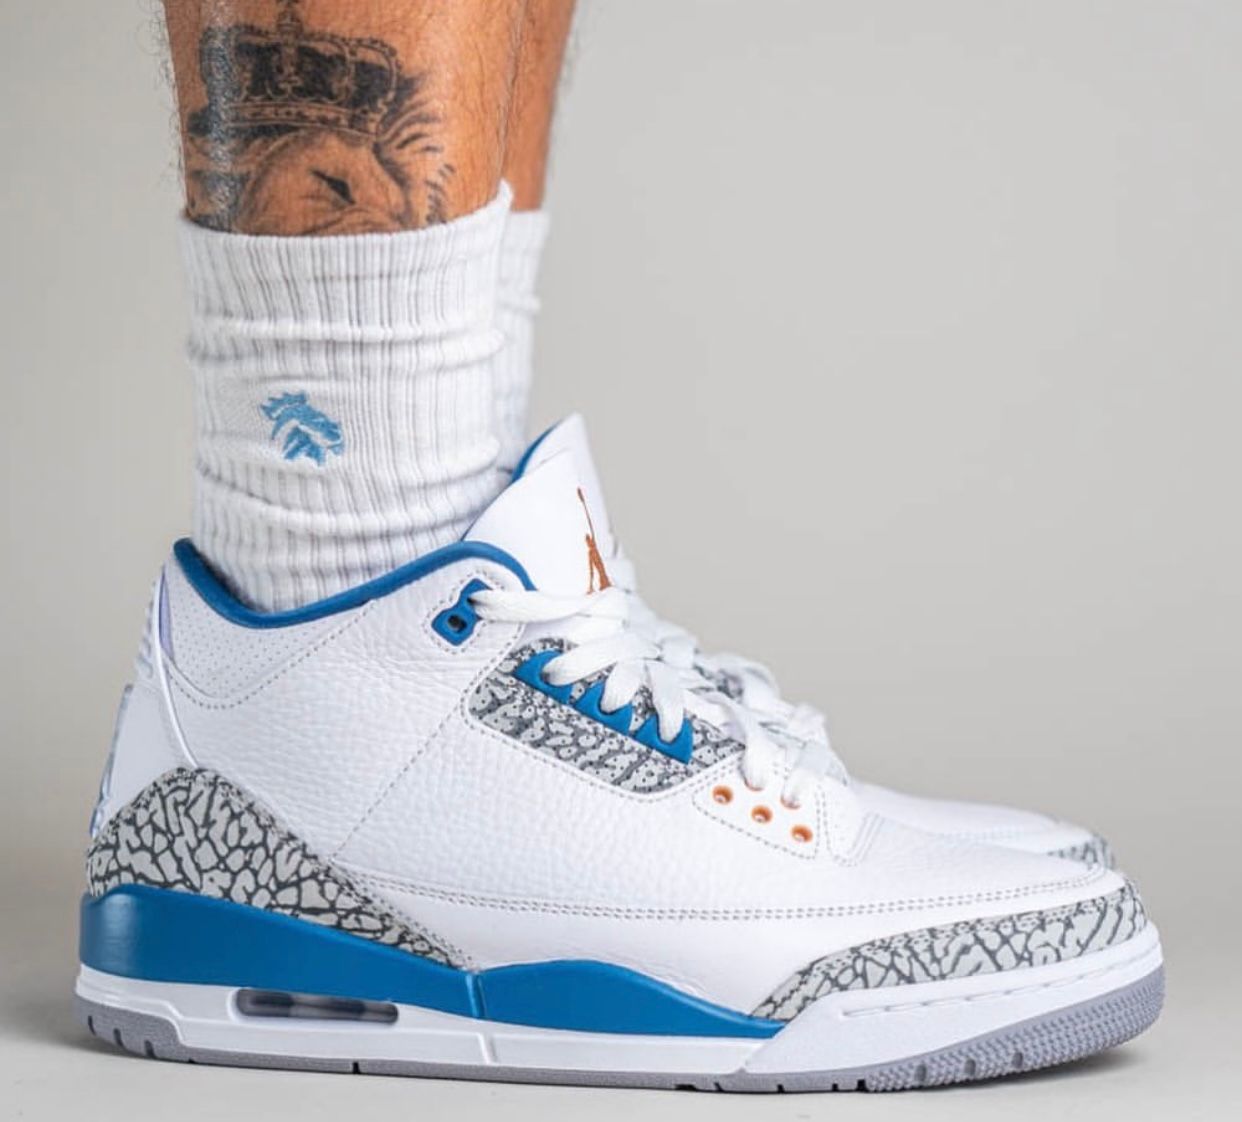 Air Jordan 3 Wizards Pe C T8532 148 Release Date on Feet Lateral